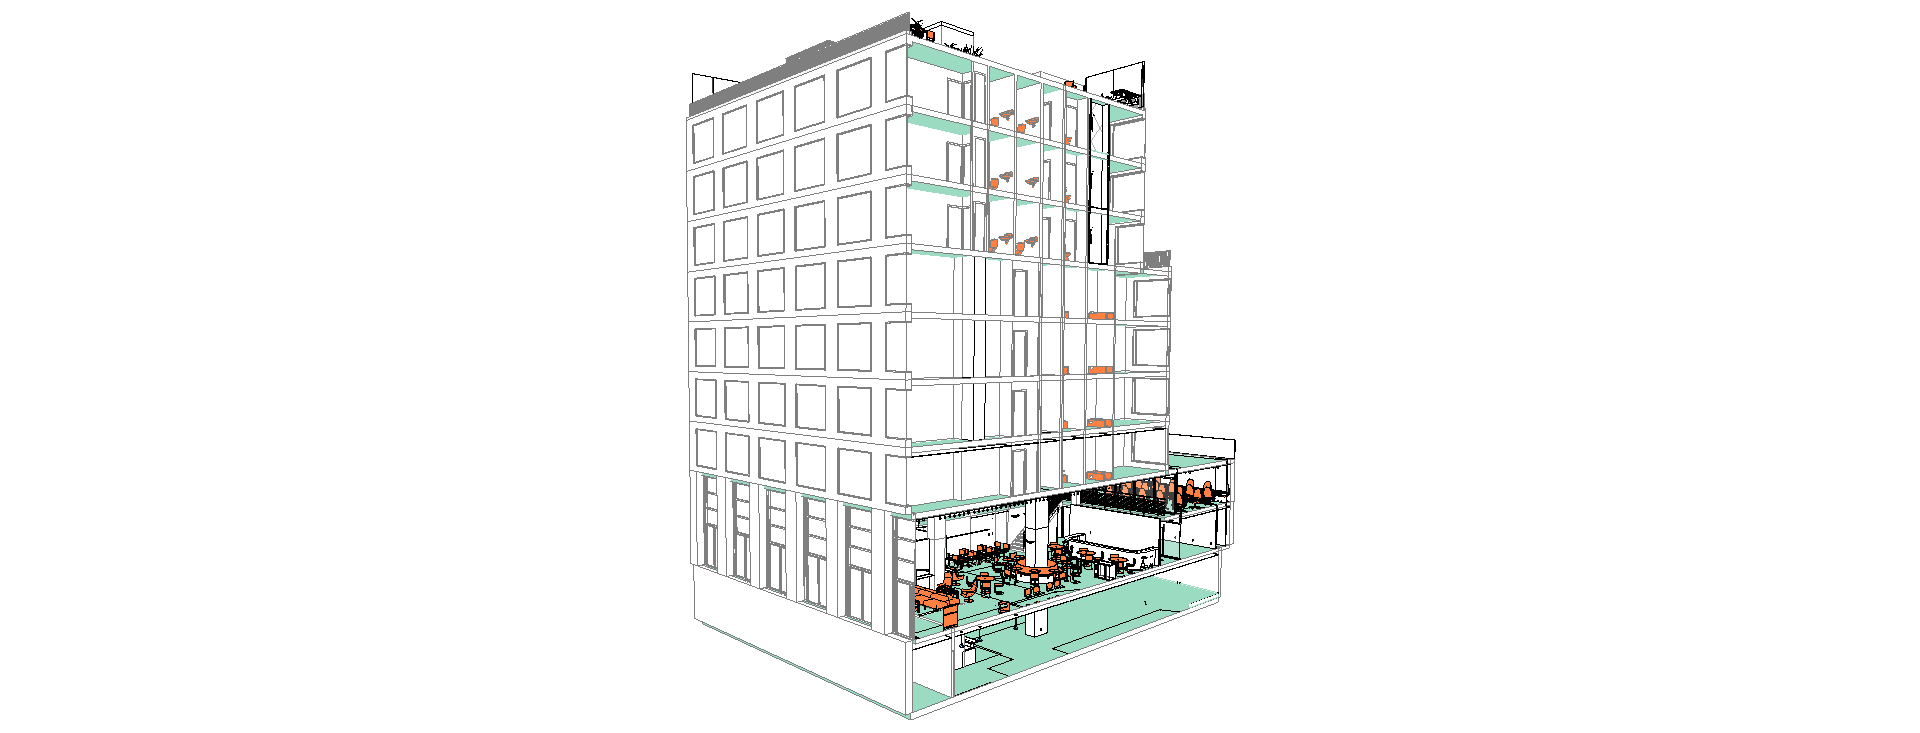 138_BowerySt_3Dmodel.PNG